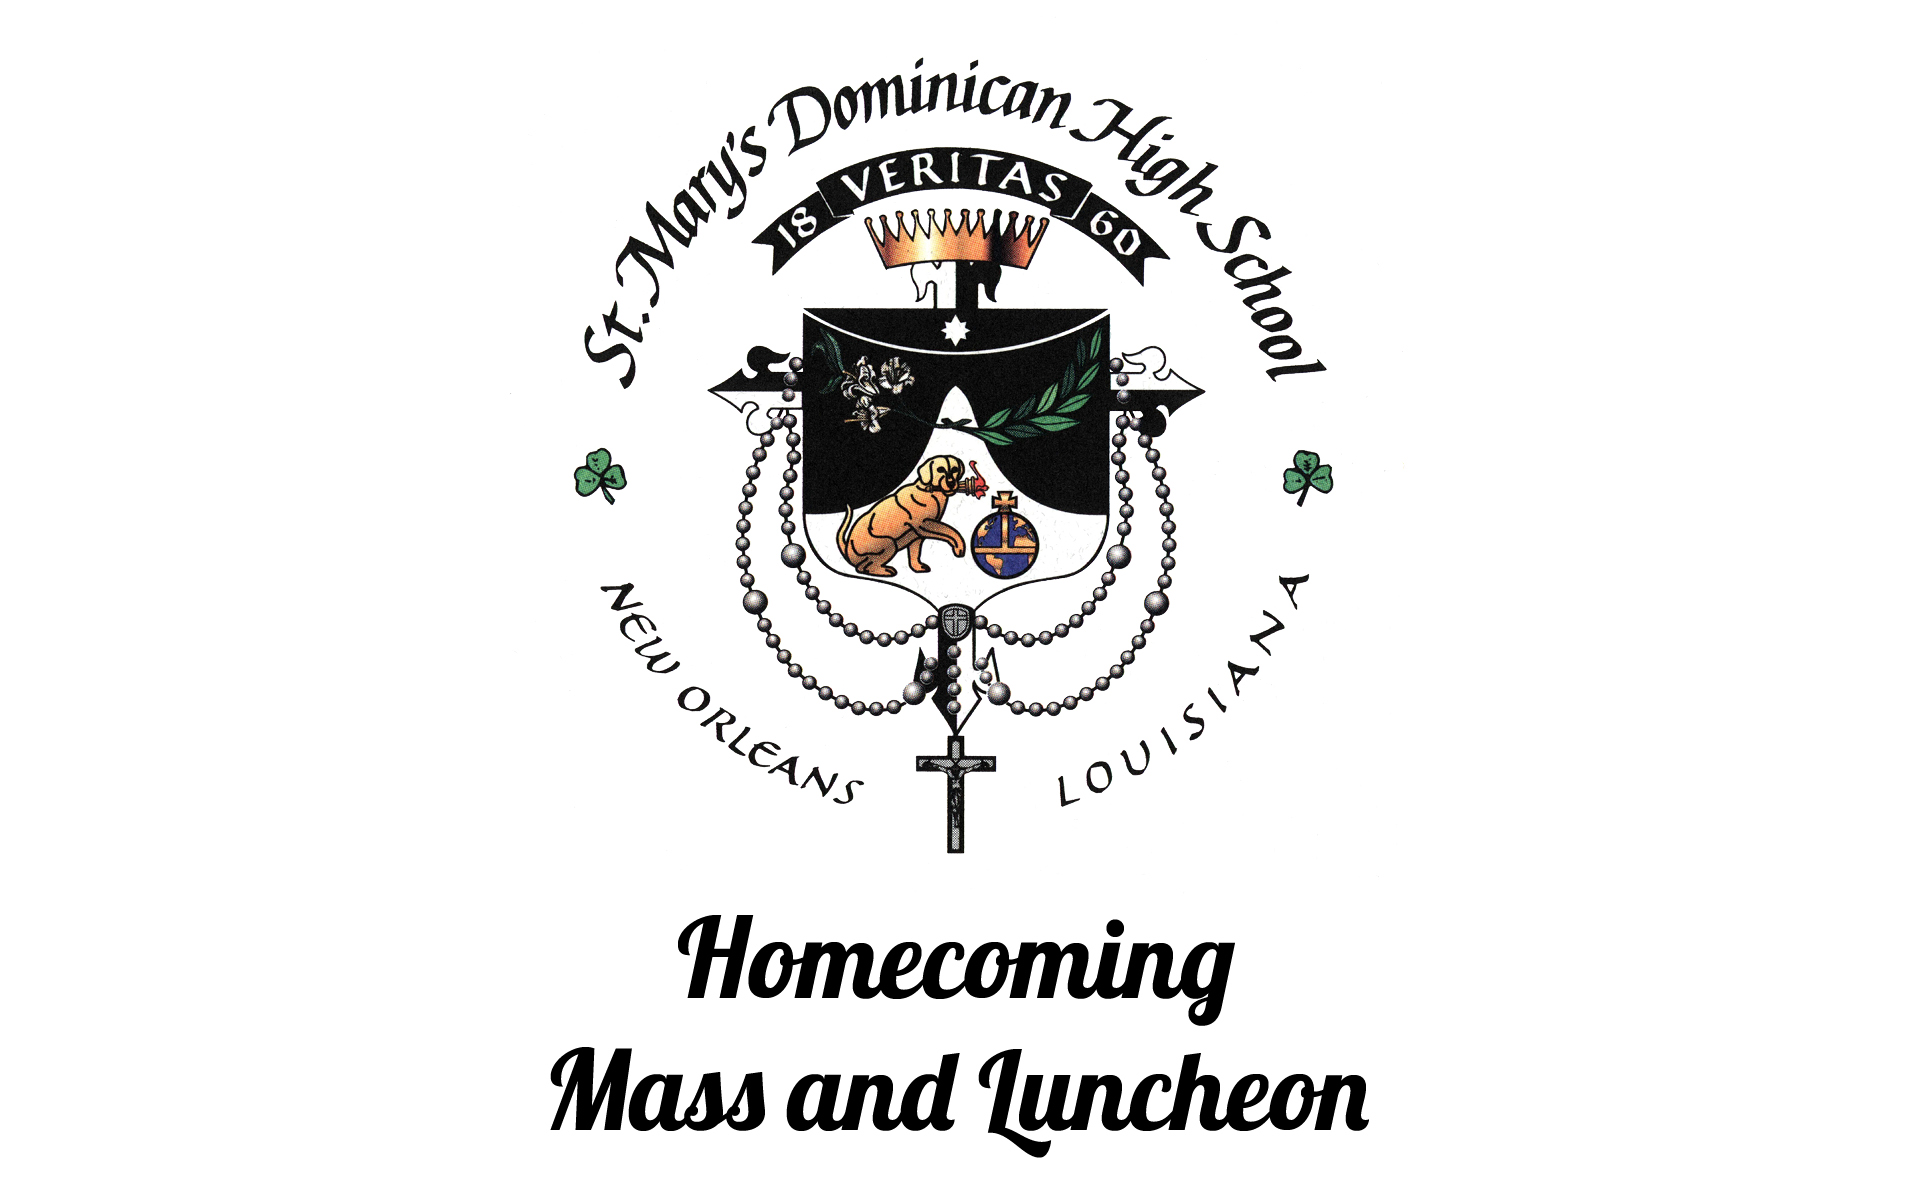 Mass and Luncheon St. Mary's Dominican High